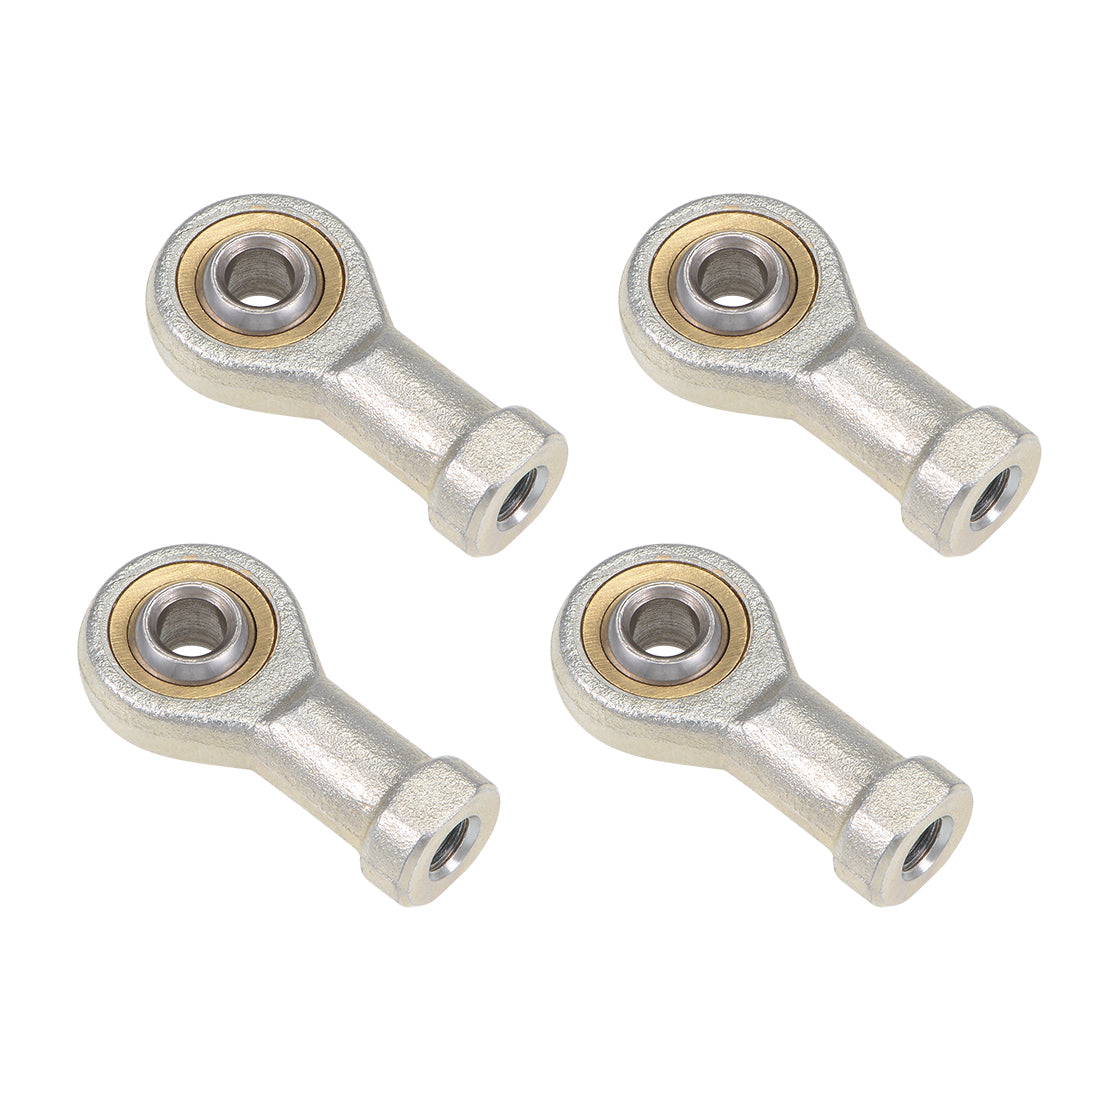 uxcell Uxcell 6mm Rod End Bearing M6x1.0mm Rod Ends Ball Joint Female Left Hand Thread 4pcs